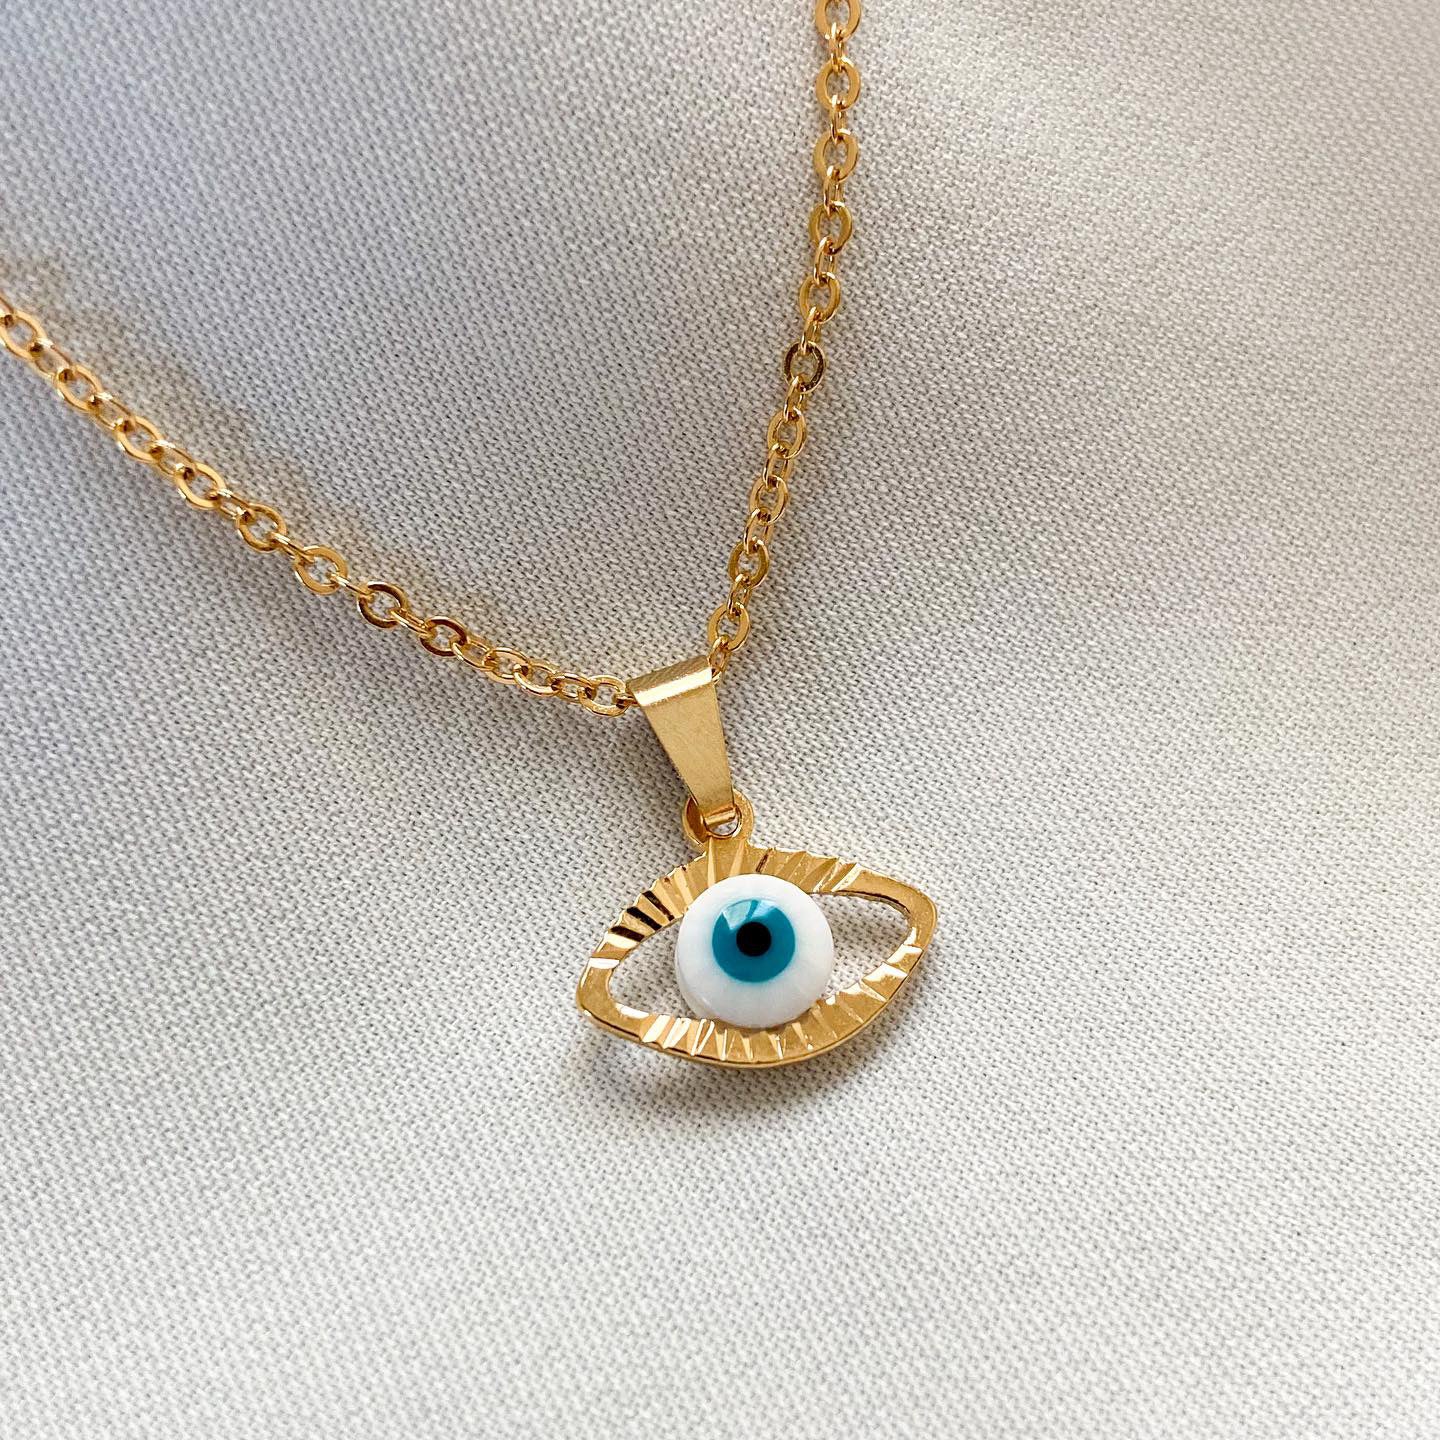 Evil eye silver necklace with blue and white zircon